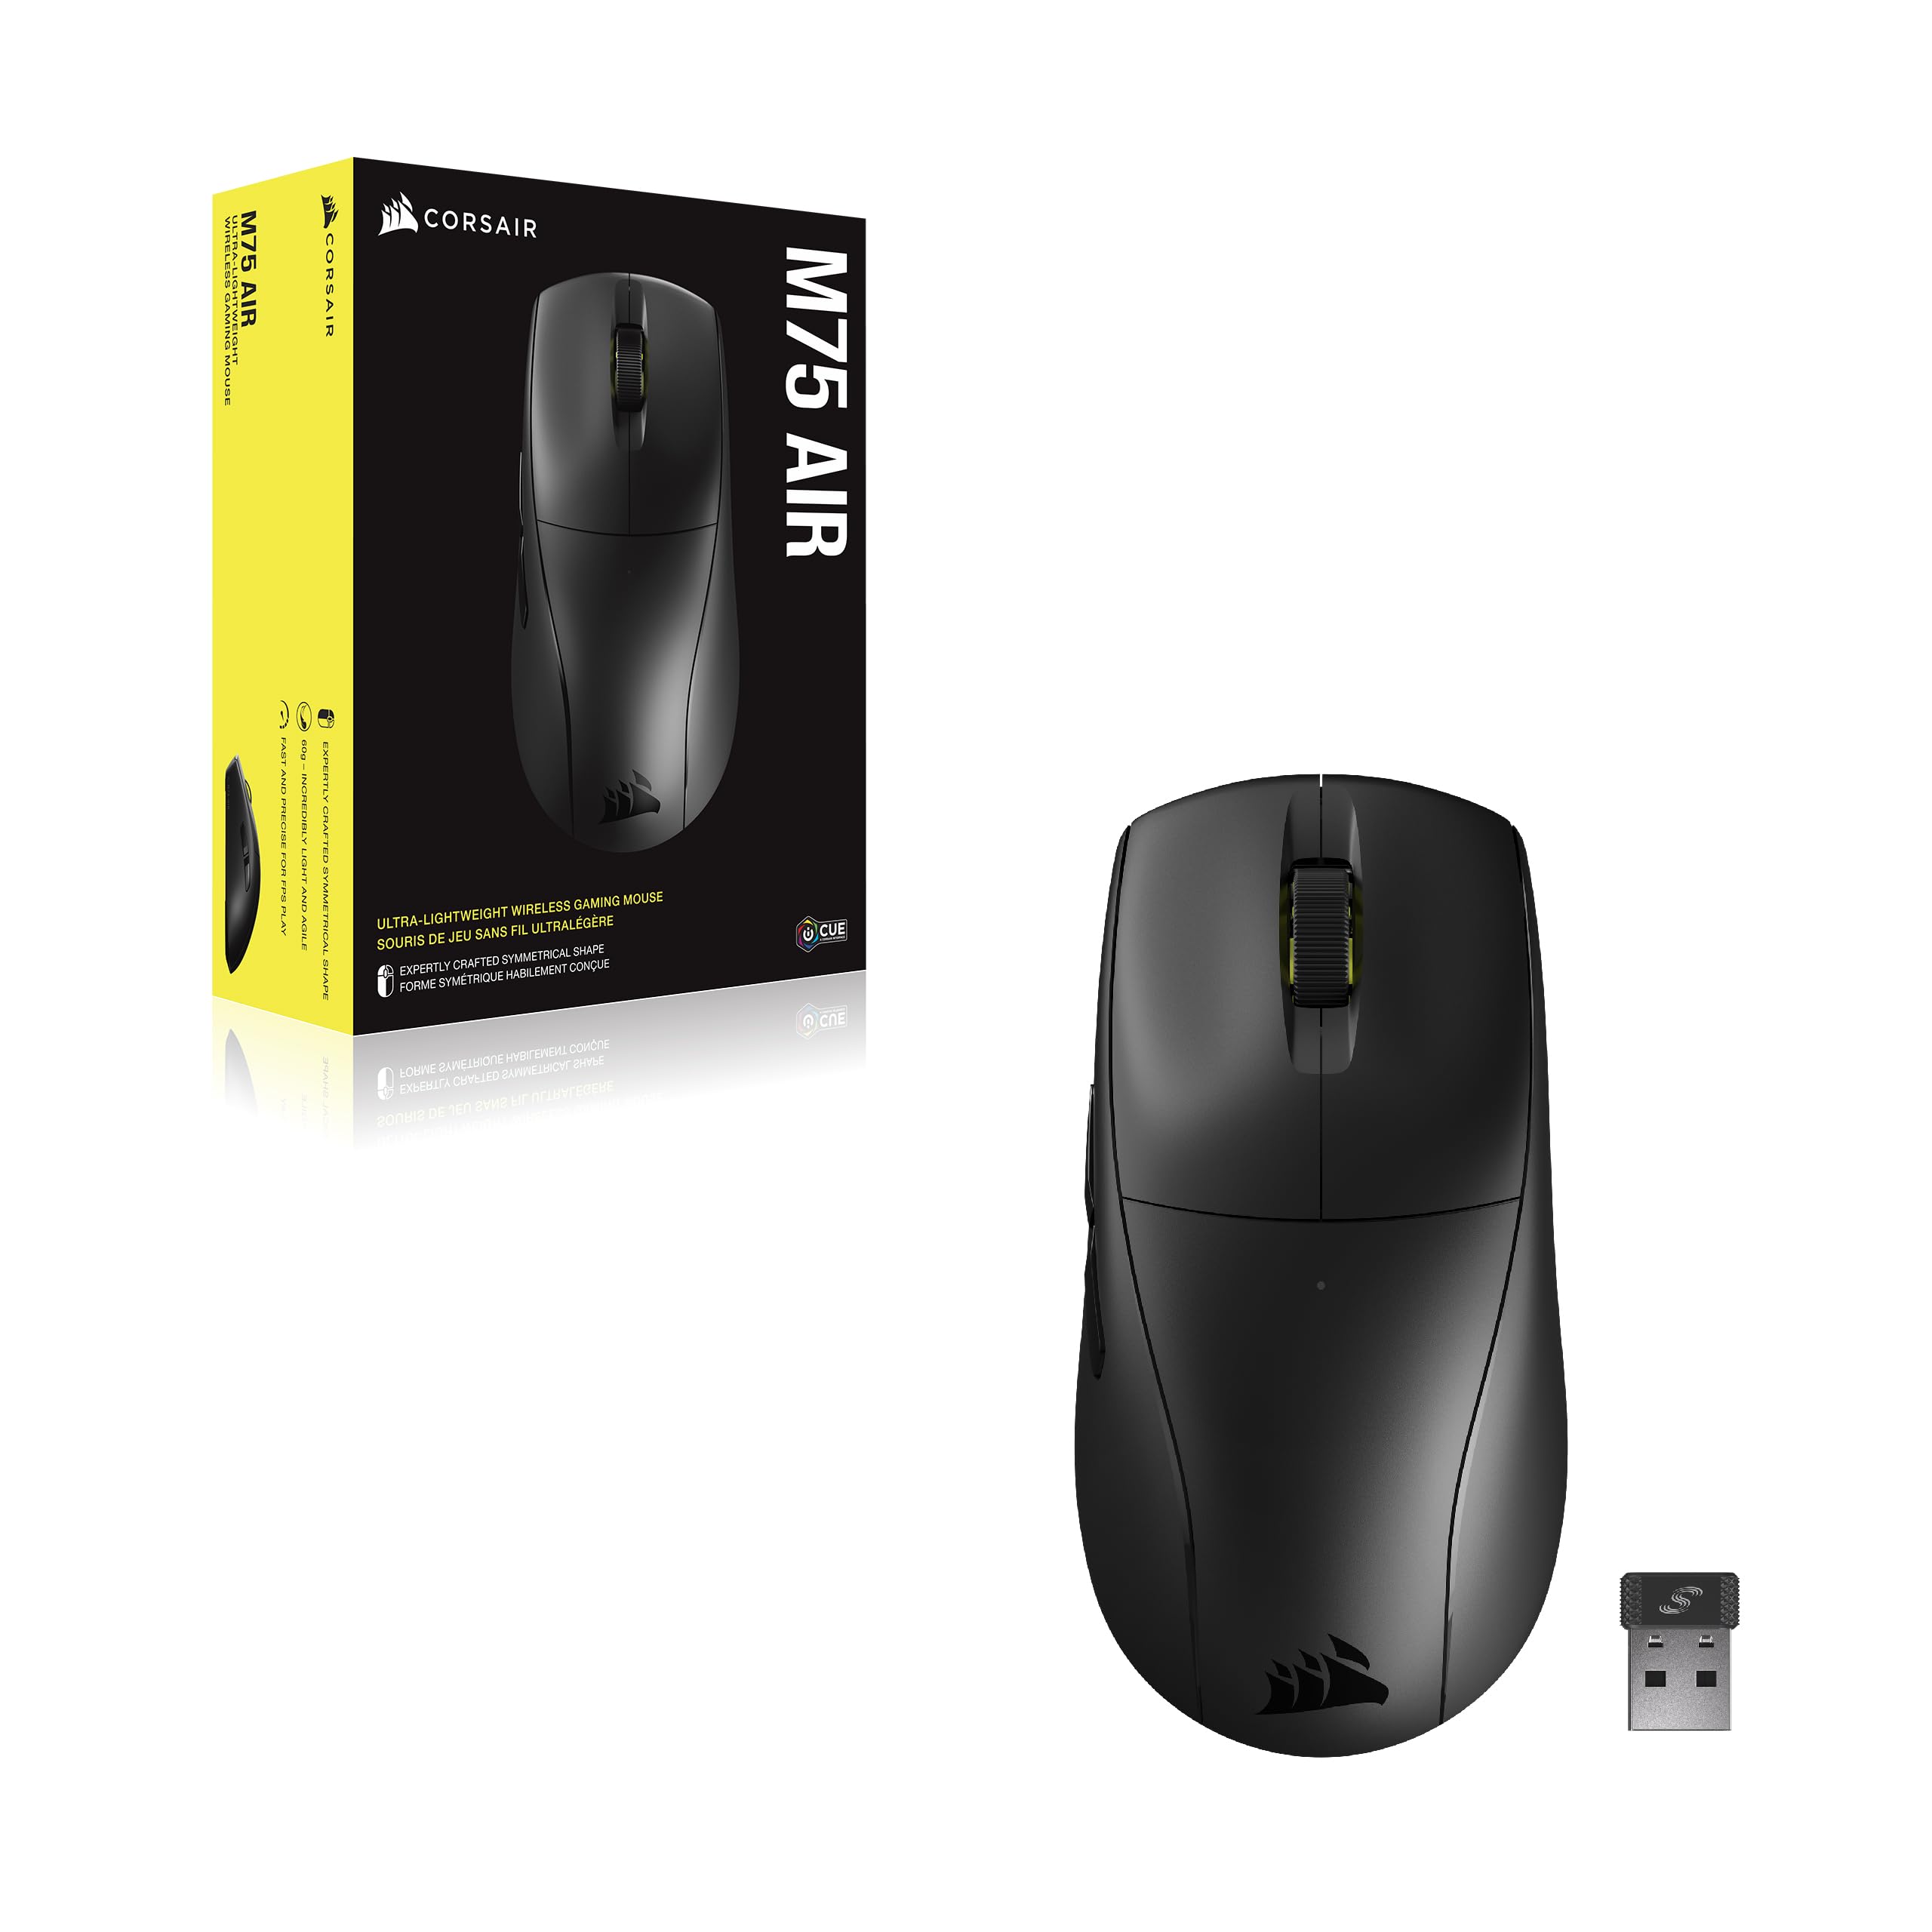 Corsair M75 AIR Wireless Ultra Lightweight Gaming Mouse (Black) $80 + Free Shipping